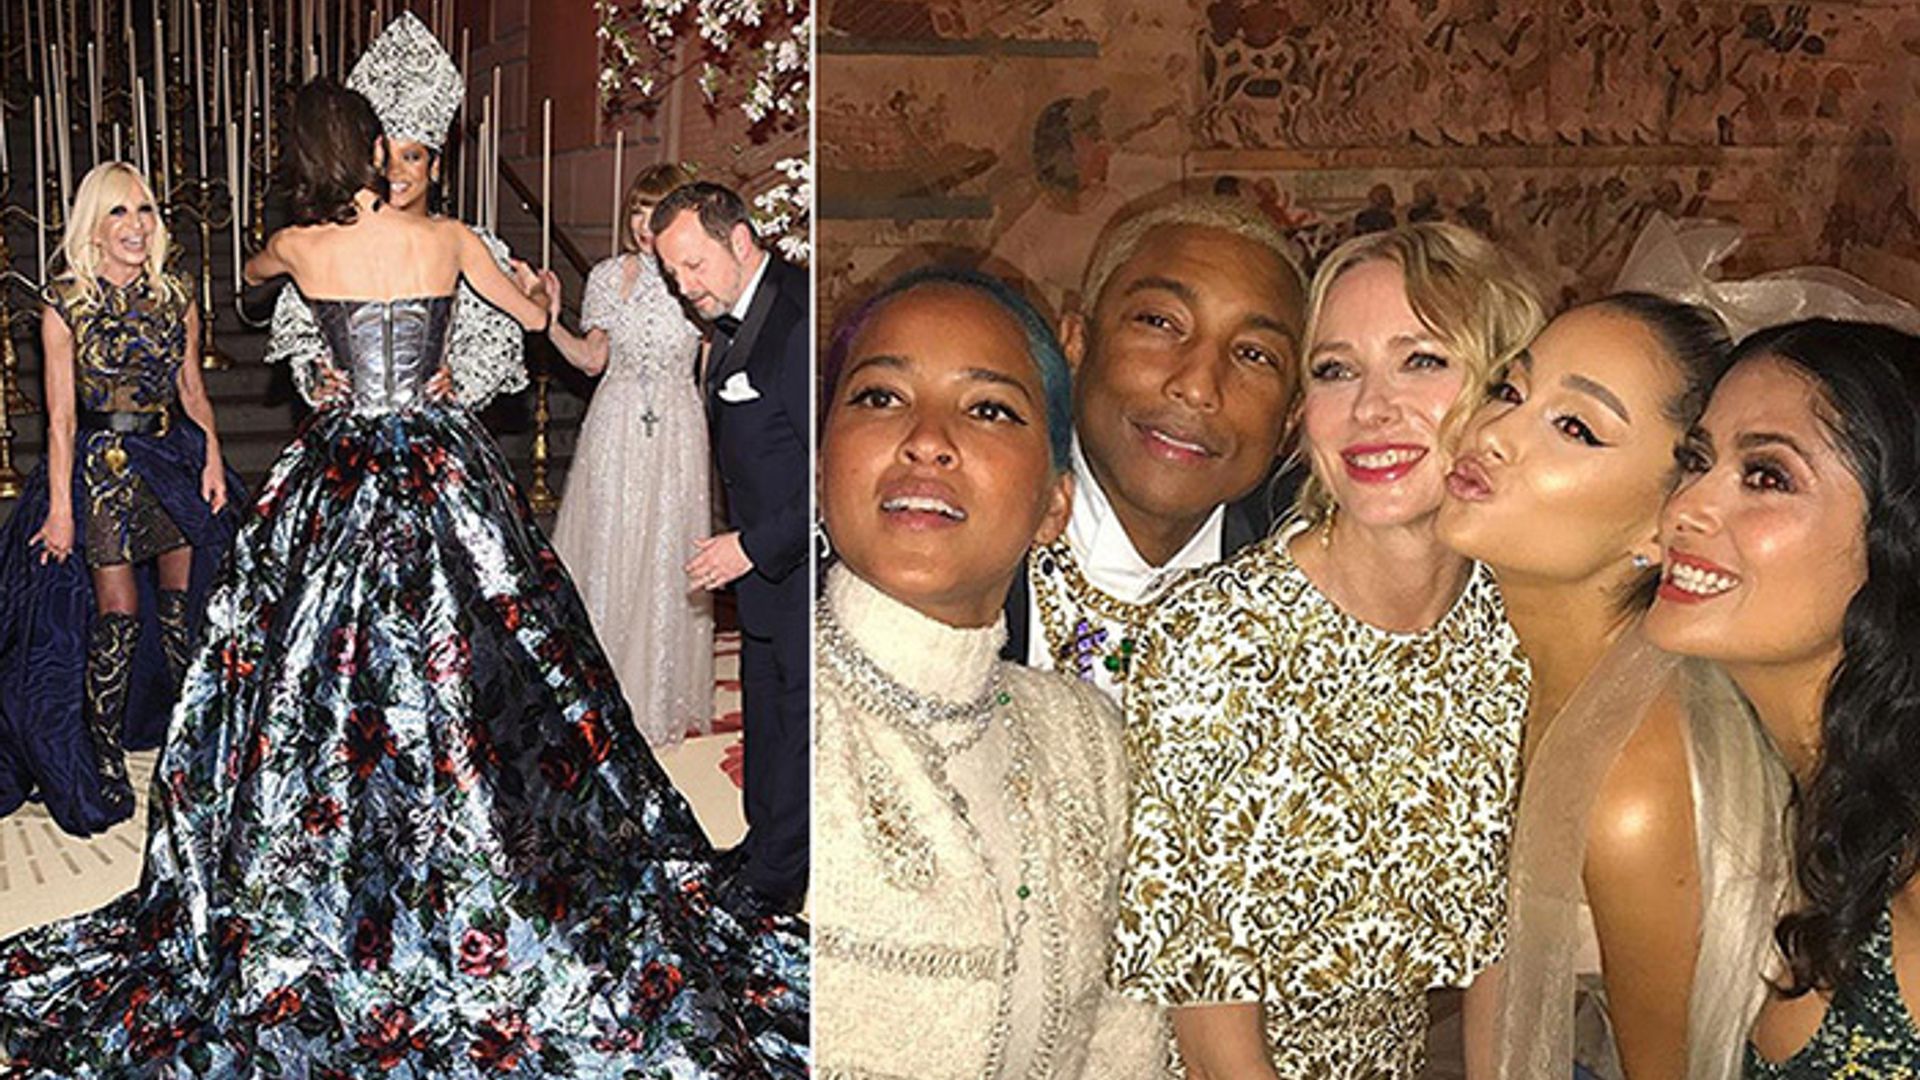 Met Gala 2018: Go behind the scenes with the best candids, Instagram snaps and party photos